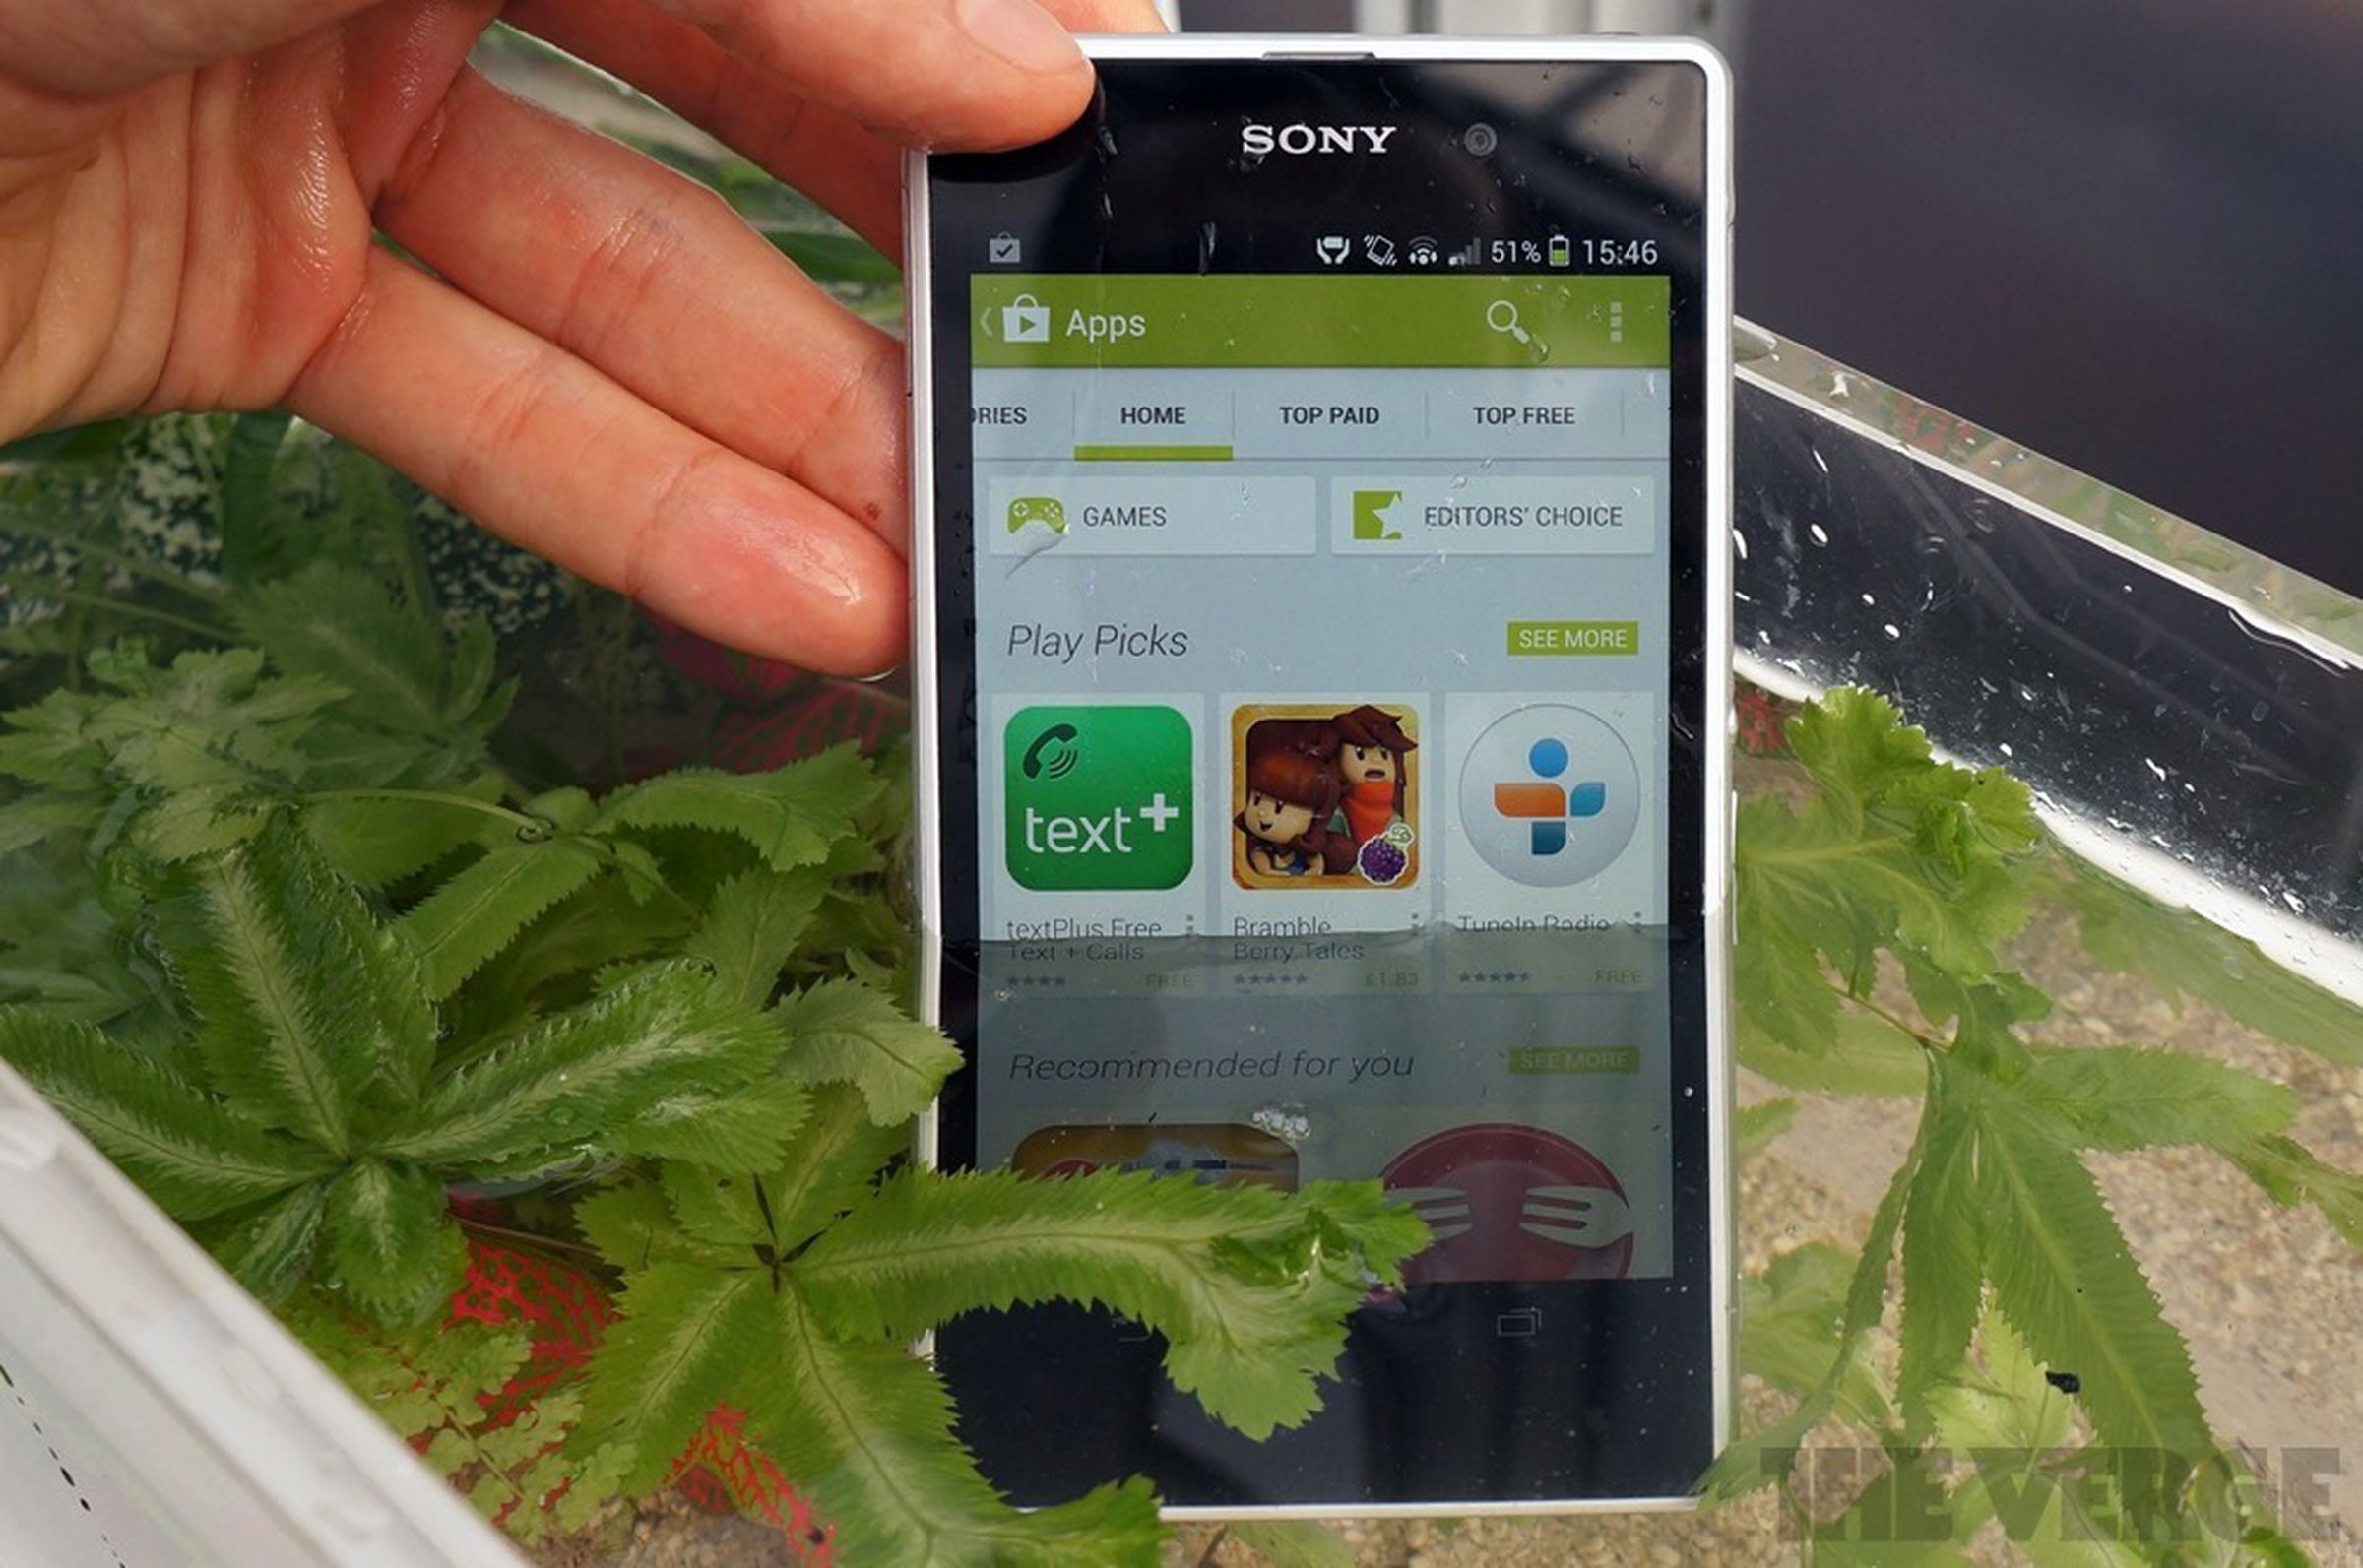 Sony Xperia Z1 hands-on gallery